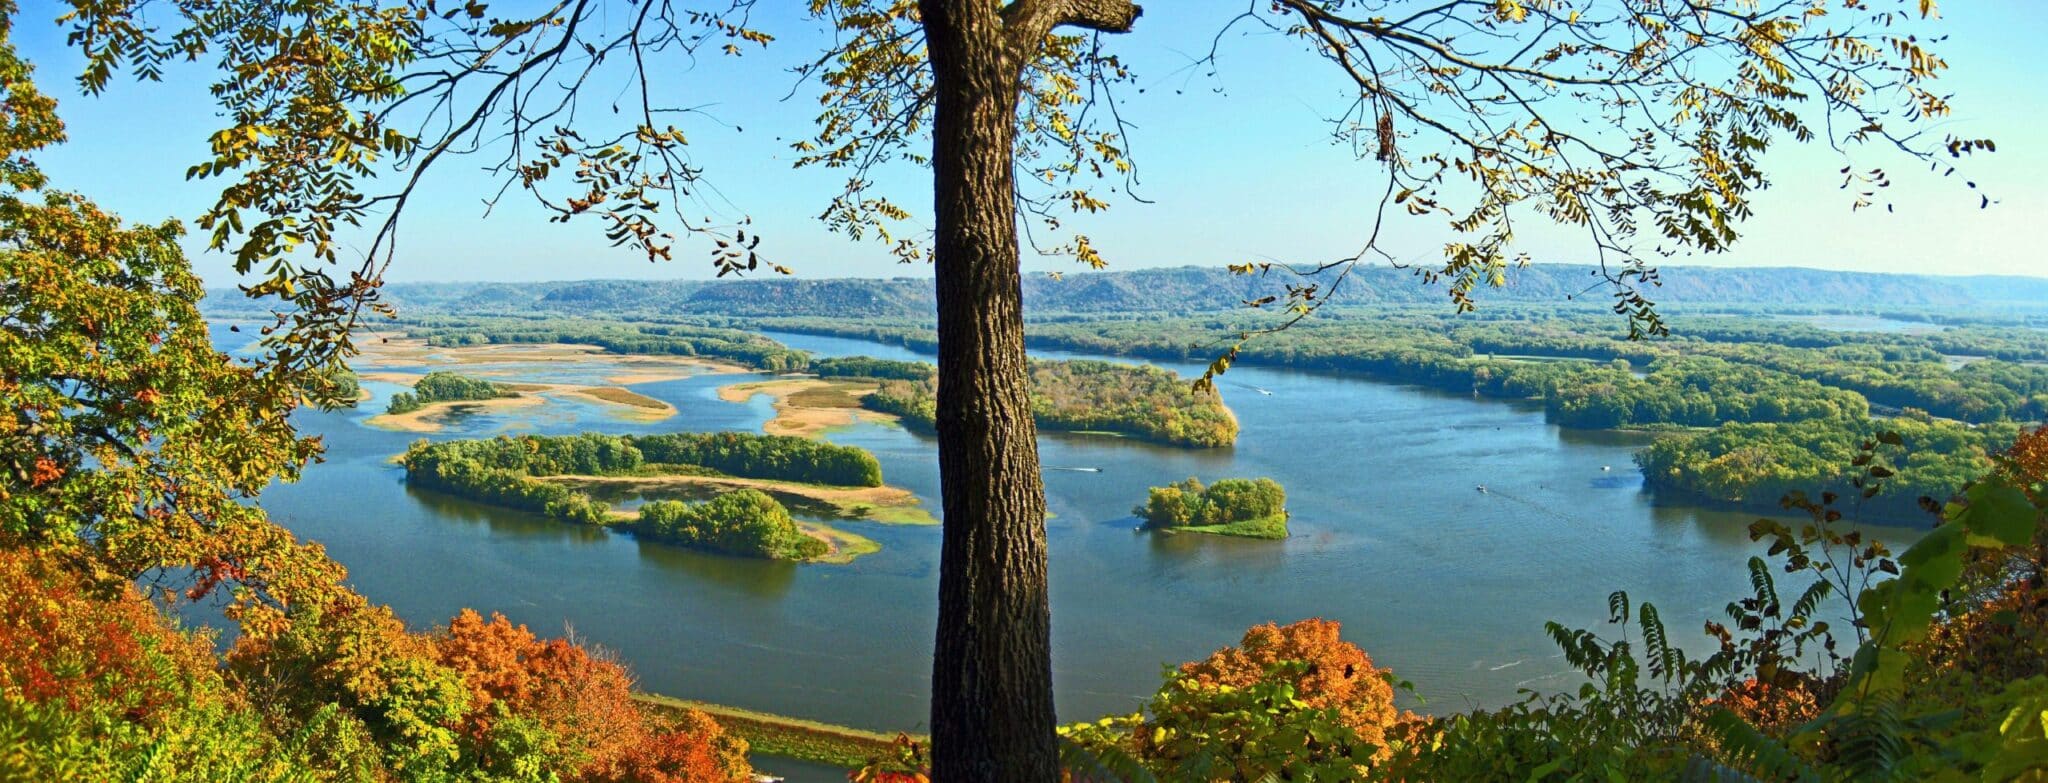 <p>The Great River Road National Scenic Byway runs parallel to the Mississippi River throughout the length of the state. A perfect trip for outdoor enthusiasts or history buffs, this 328-mile drive features stunning vistas, quaint river towns, limestone bluffs, and the history of the people living there for thousands of years.</p>